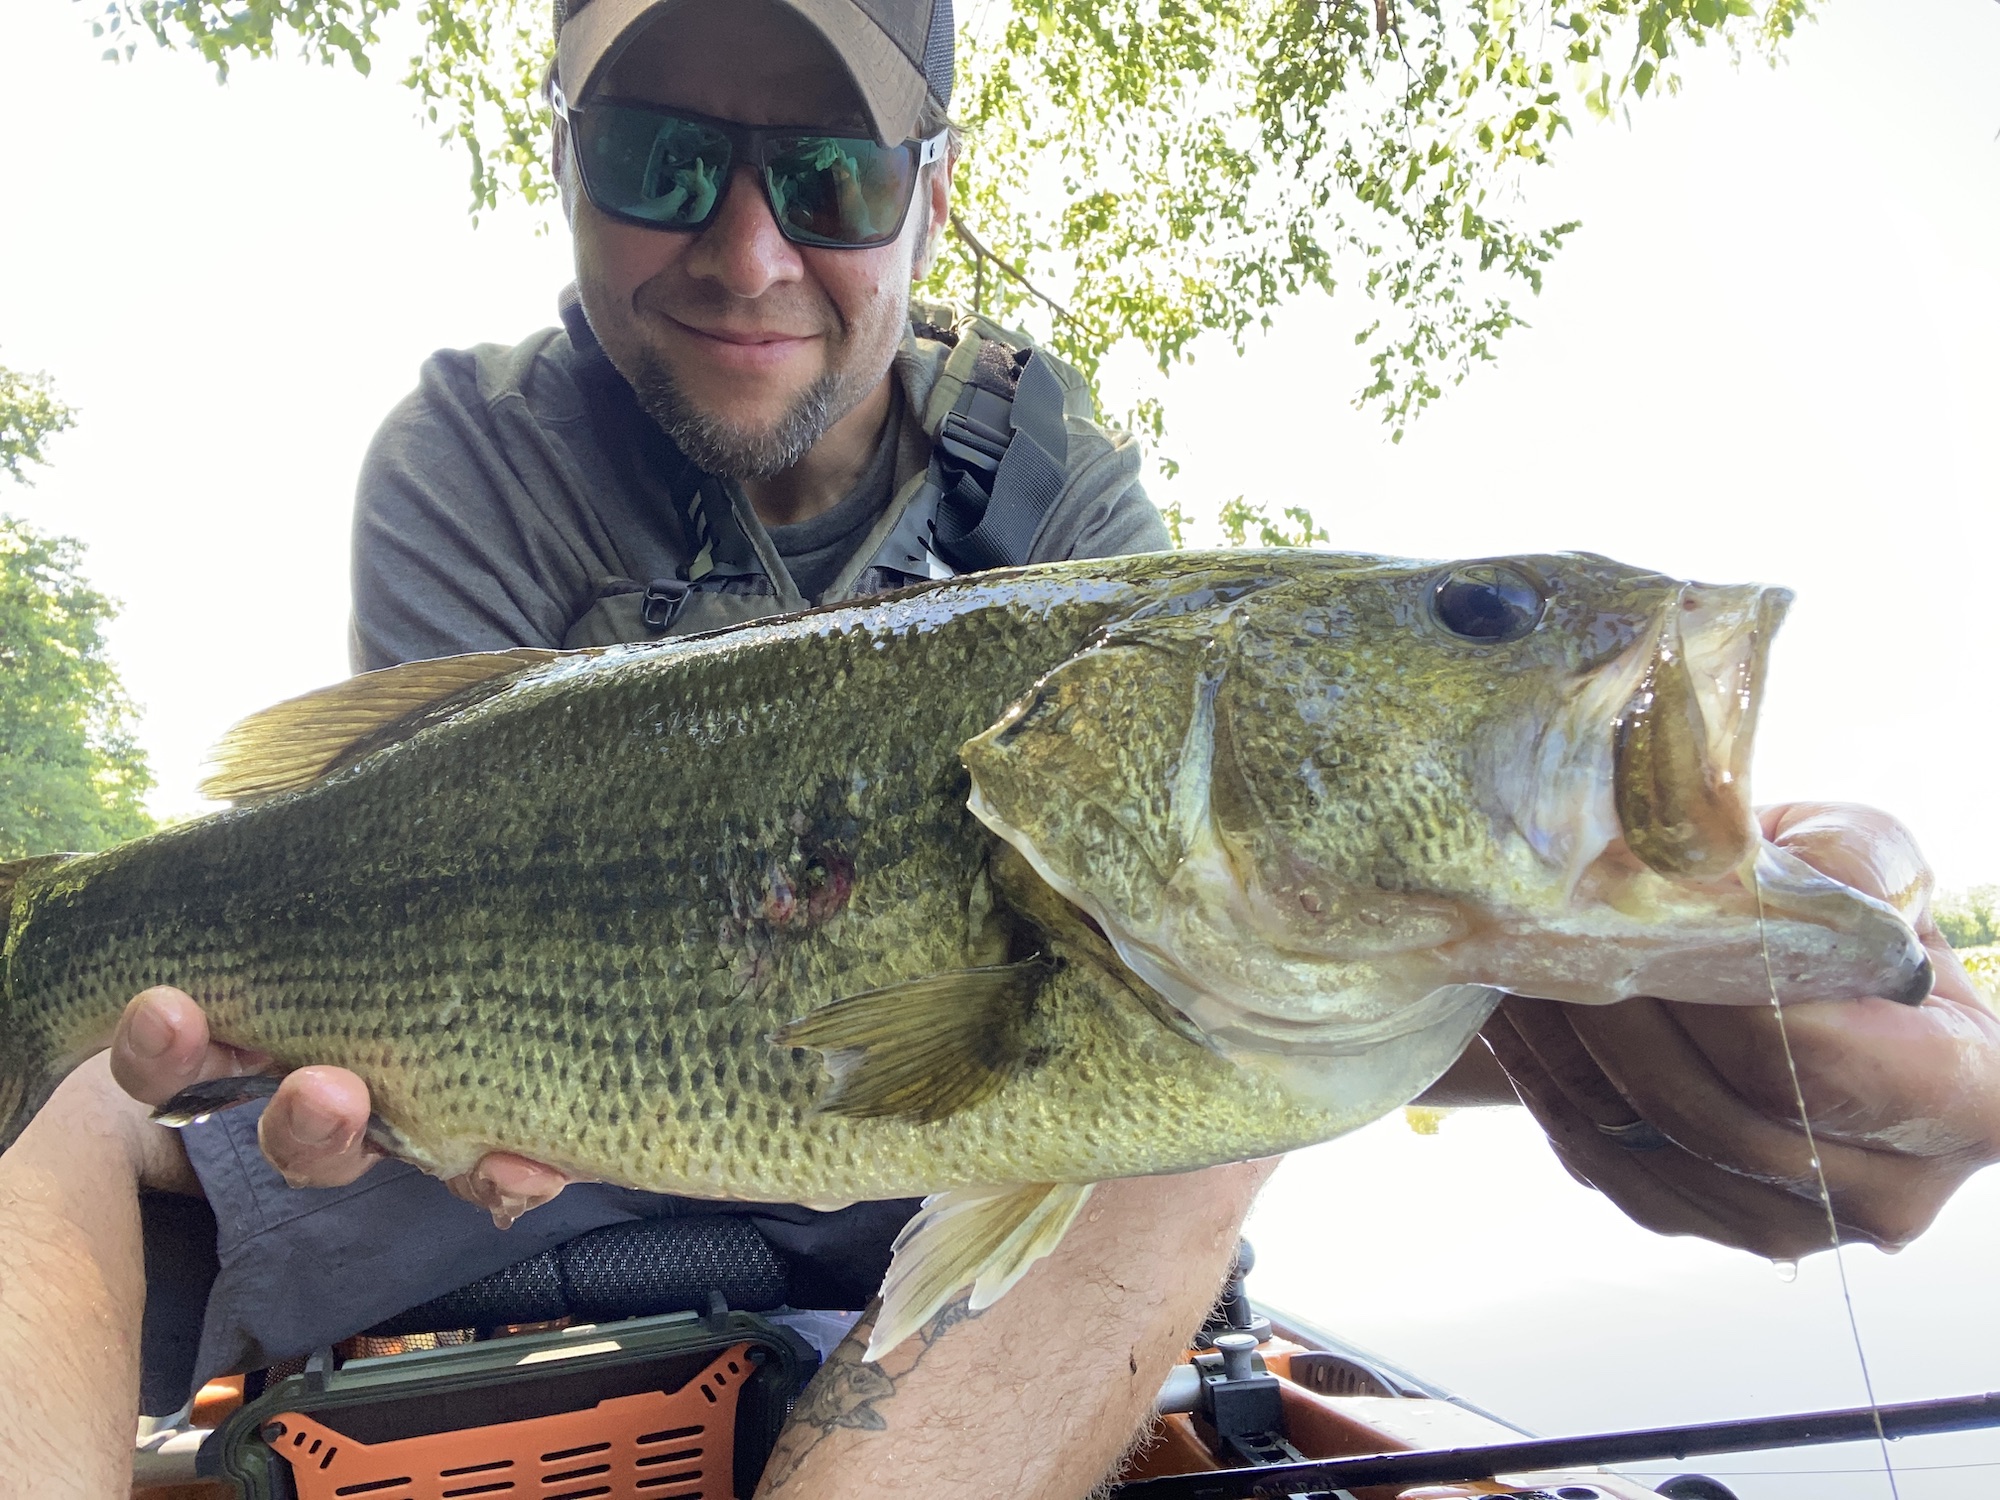 Fishing for Bass: Basic Guide and Tips for Catching More Fish